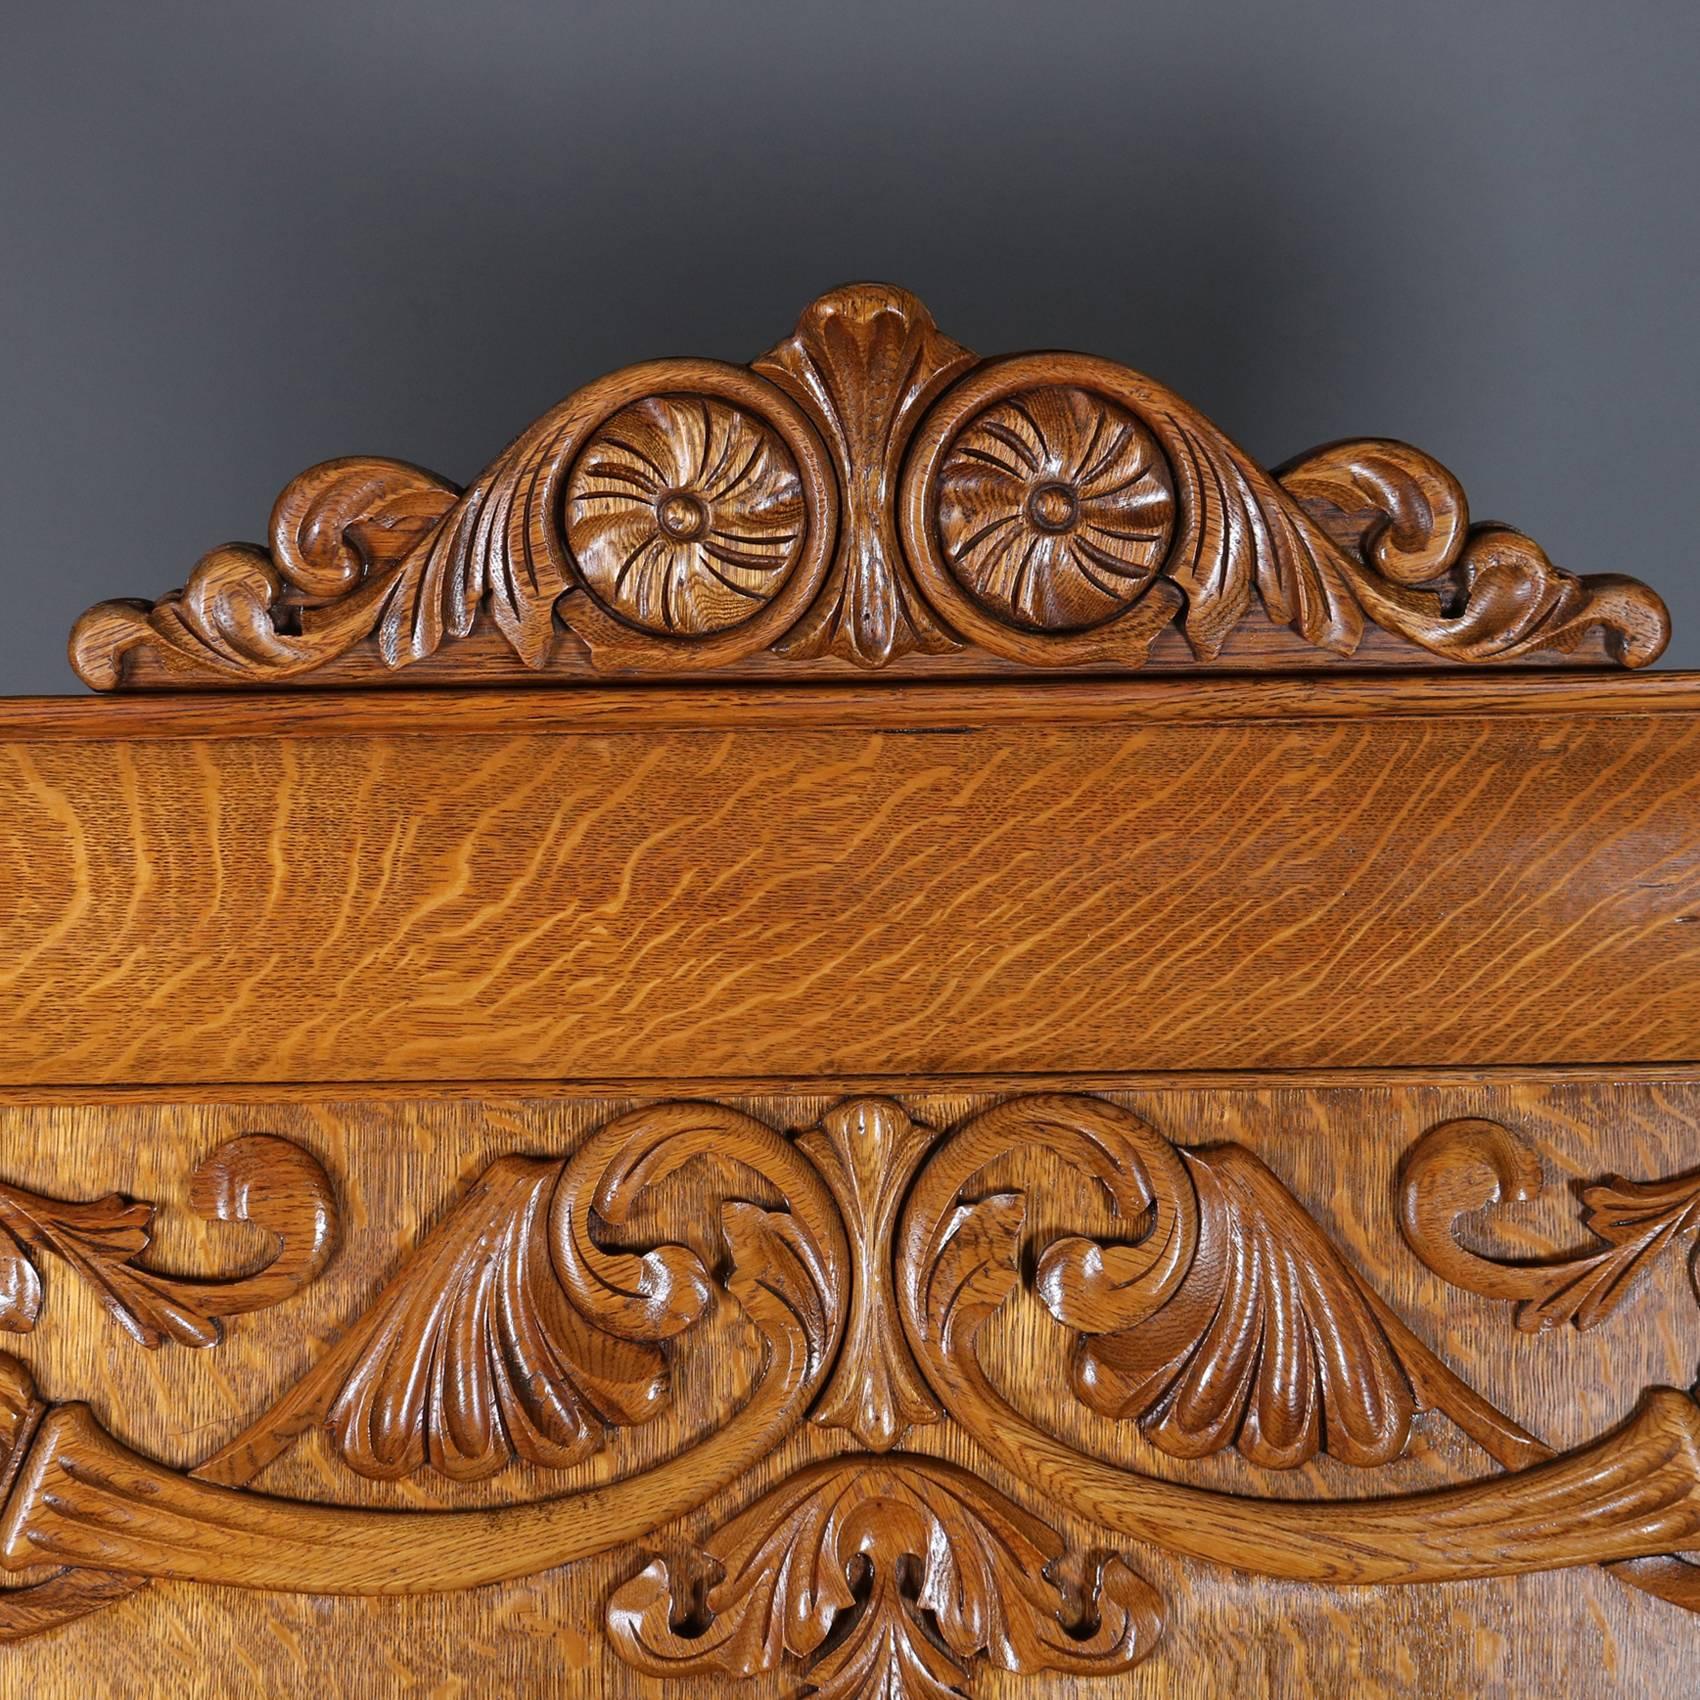 Antique full bed features quarter sawn oak construction with  carved foliate crest and flanked by carved acanthus supports, 19th century

*Matching dresser listed separately*

Measures - 79"h x 57"w; interior 75" x 54"